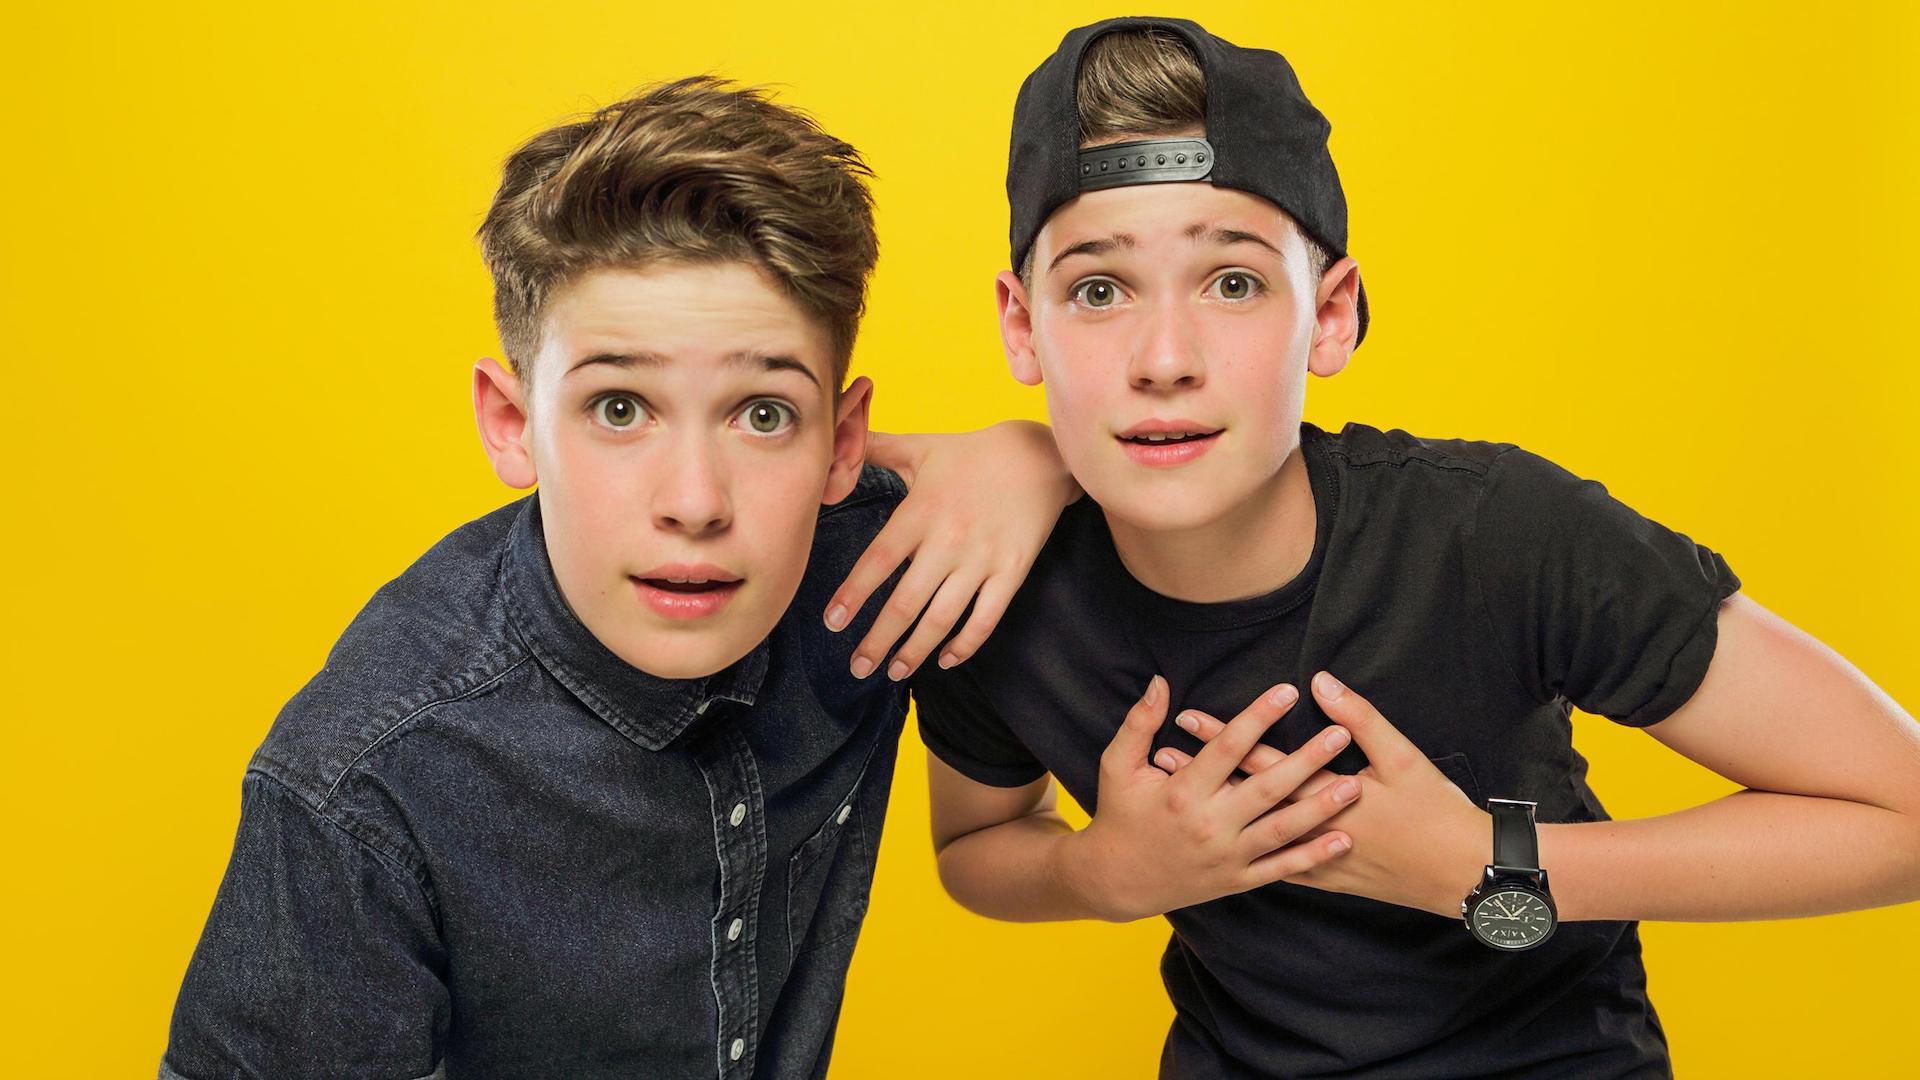 Max and Harvey dressed in black against a yellow background